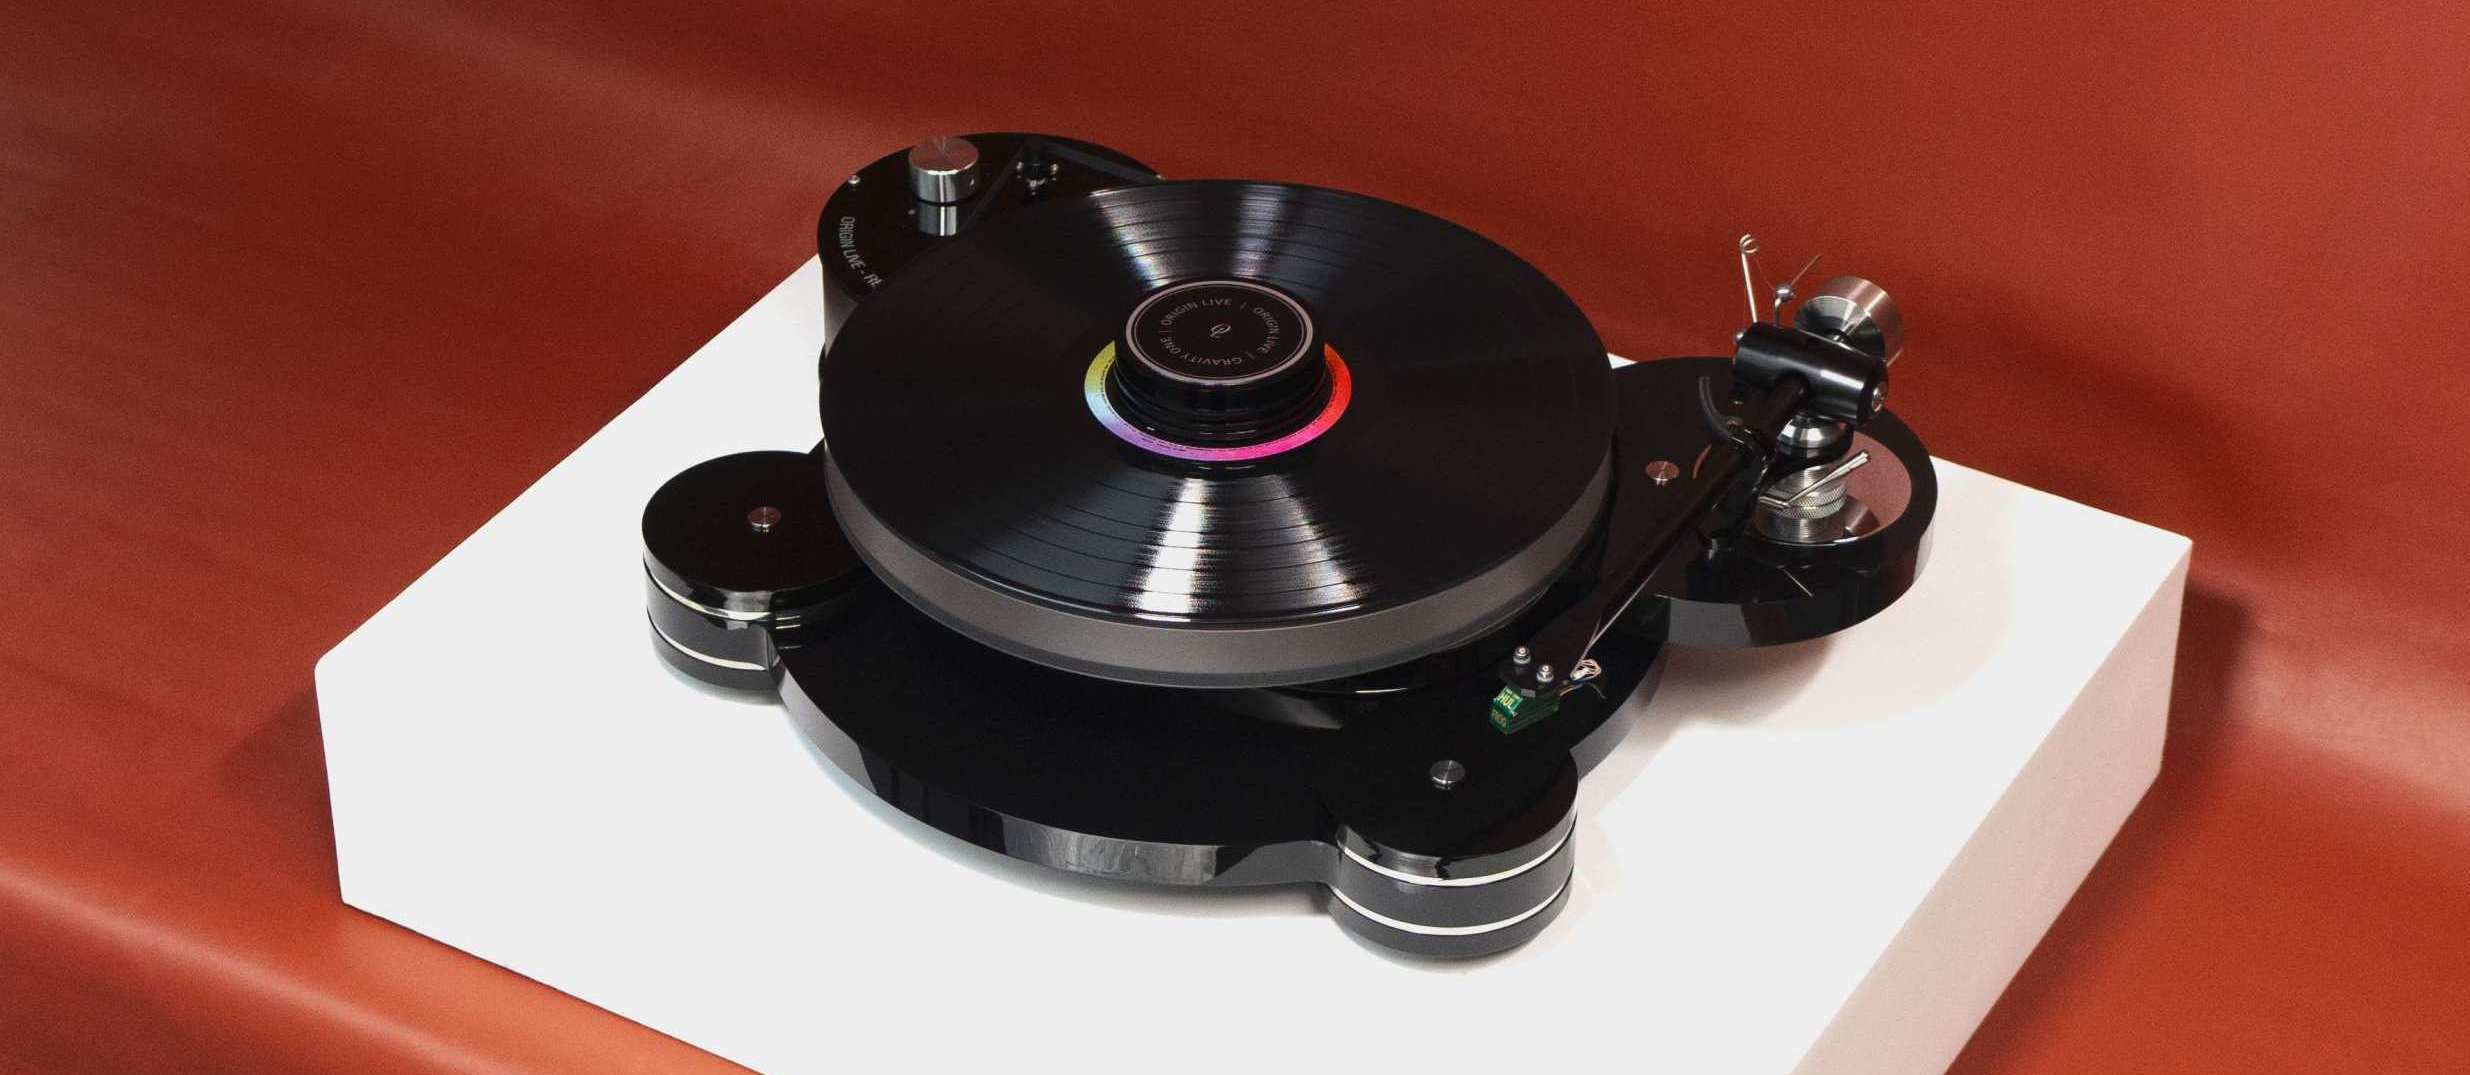 Origin Live Hi-Fi Resolution Turntable, a record player made for playing analogue vinyl audio music. mounted with an onyx tonearm